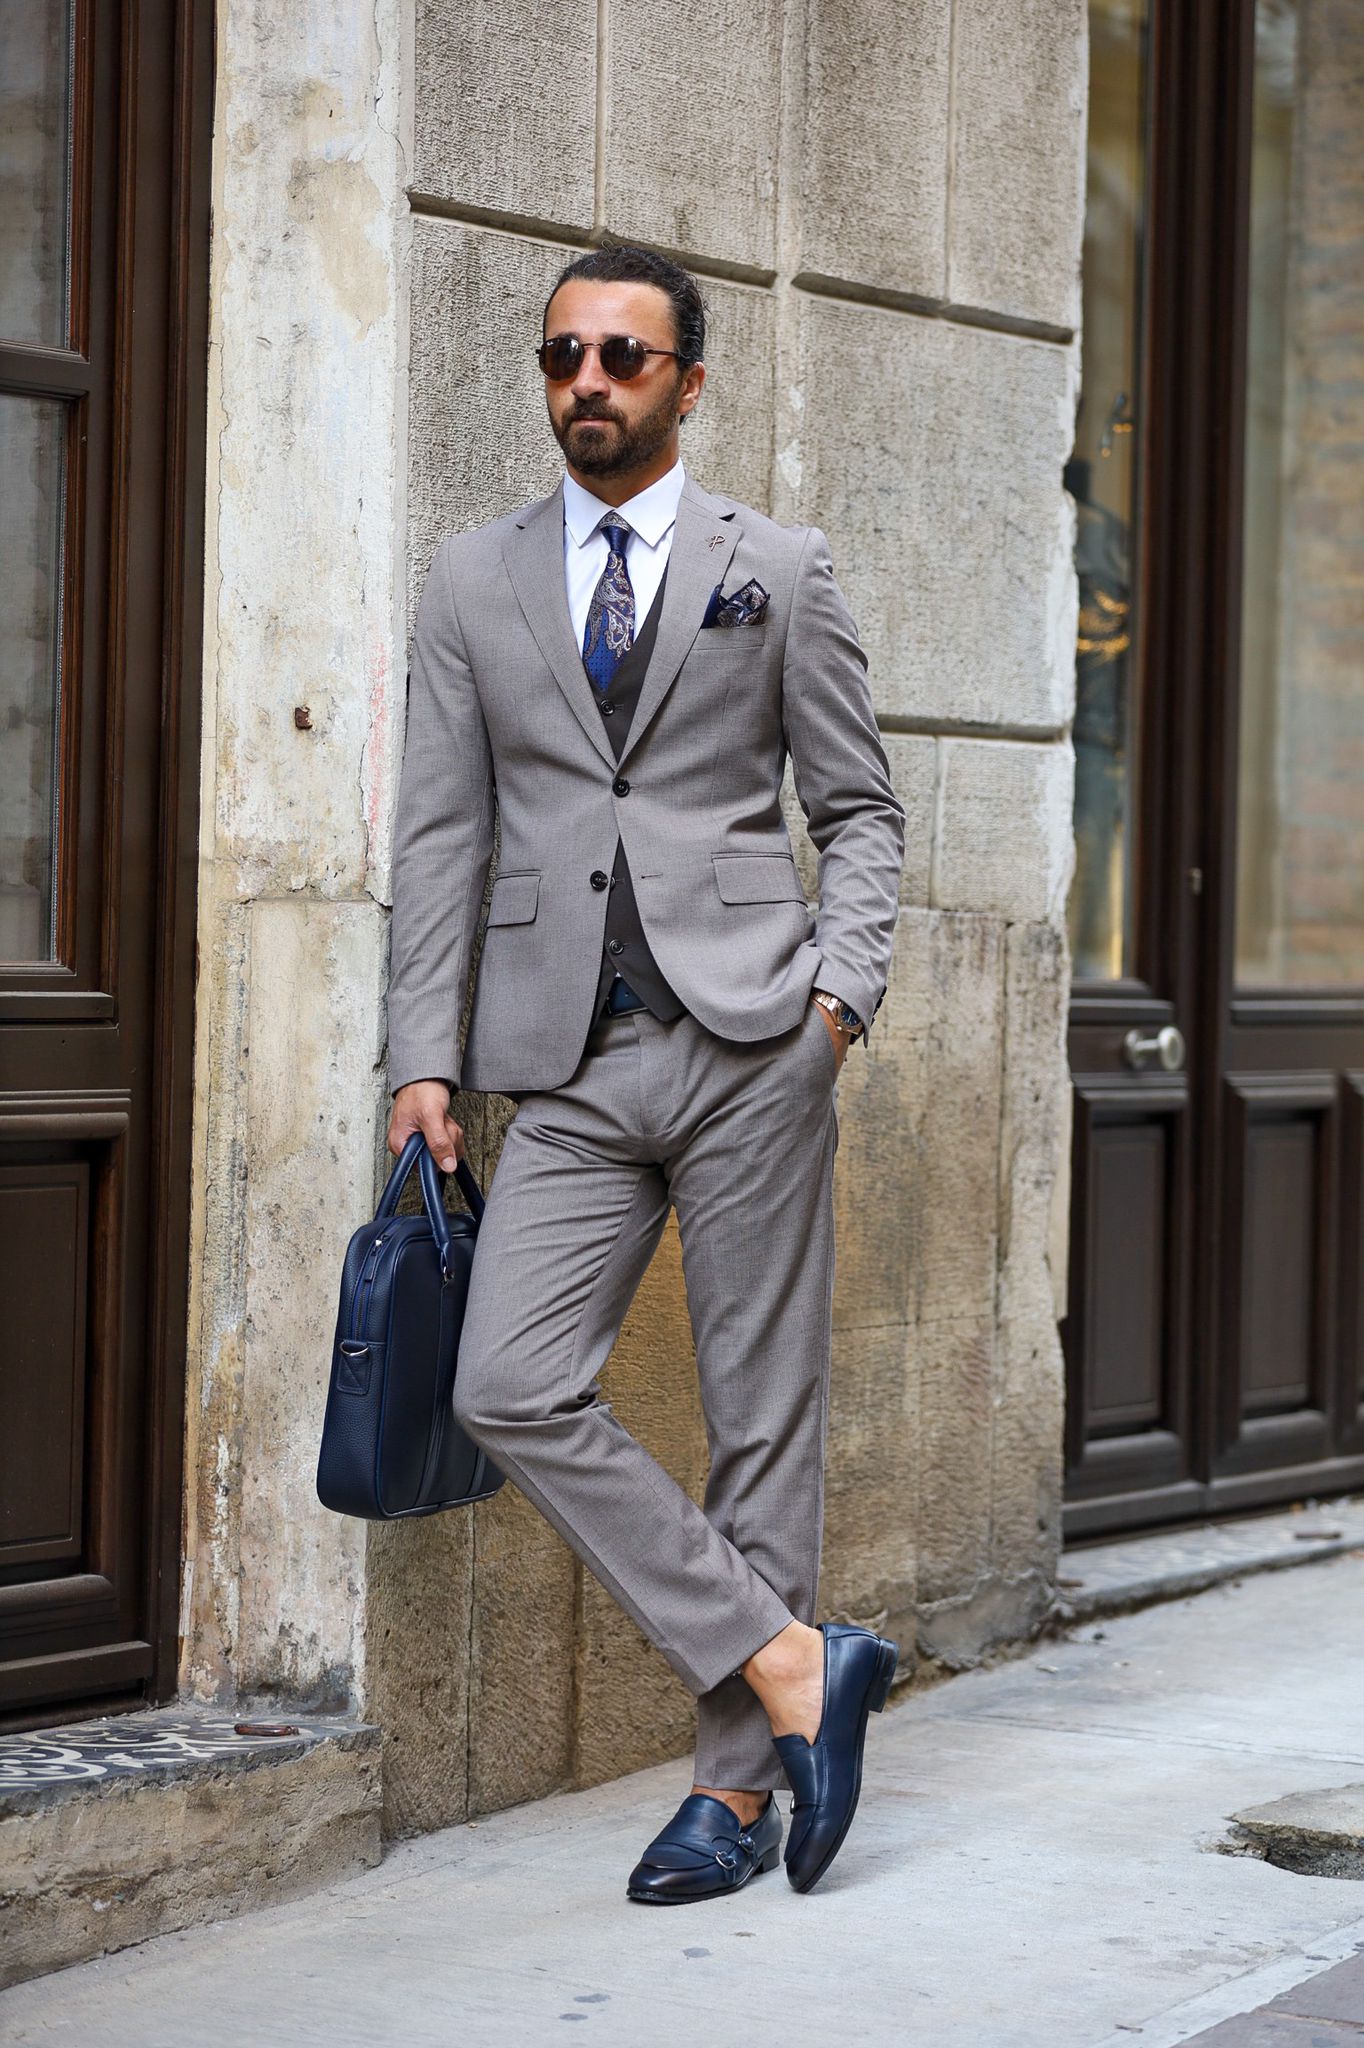 How To Pair Brown & Gray - Color Combos For Tans & Greys In Menswear